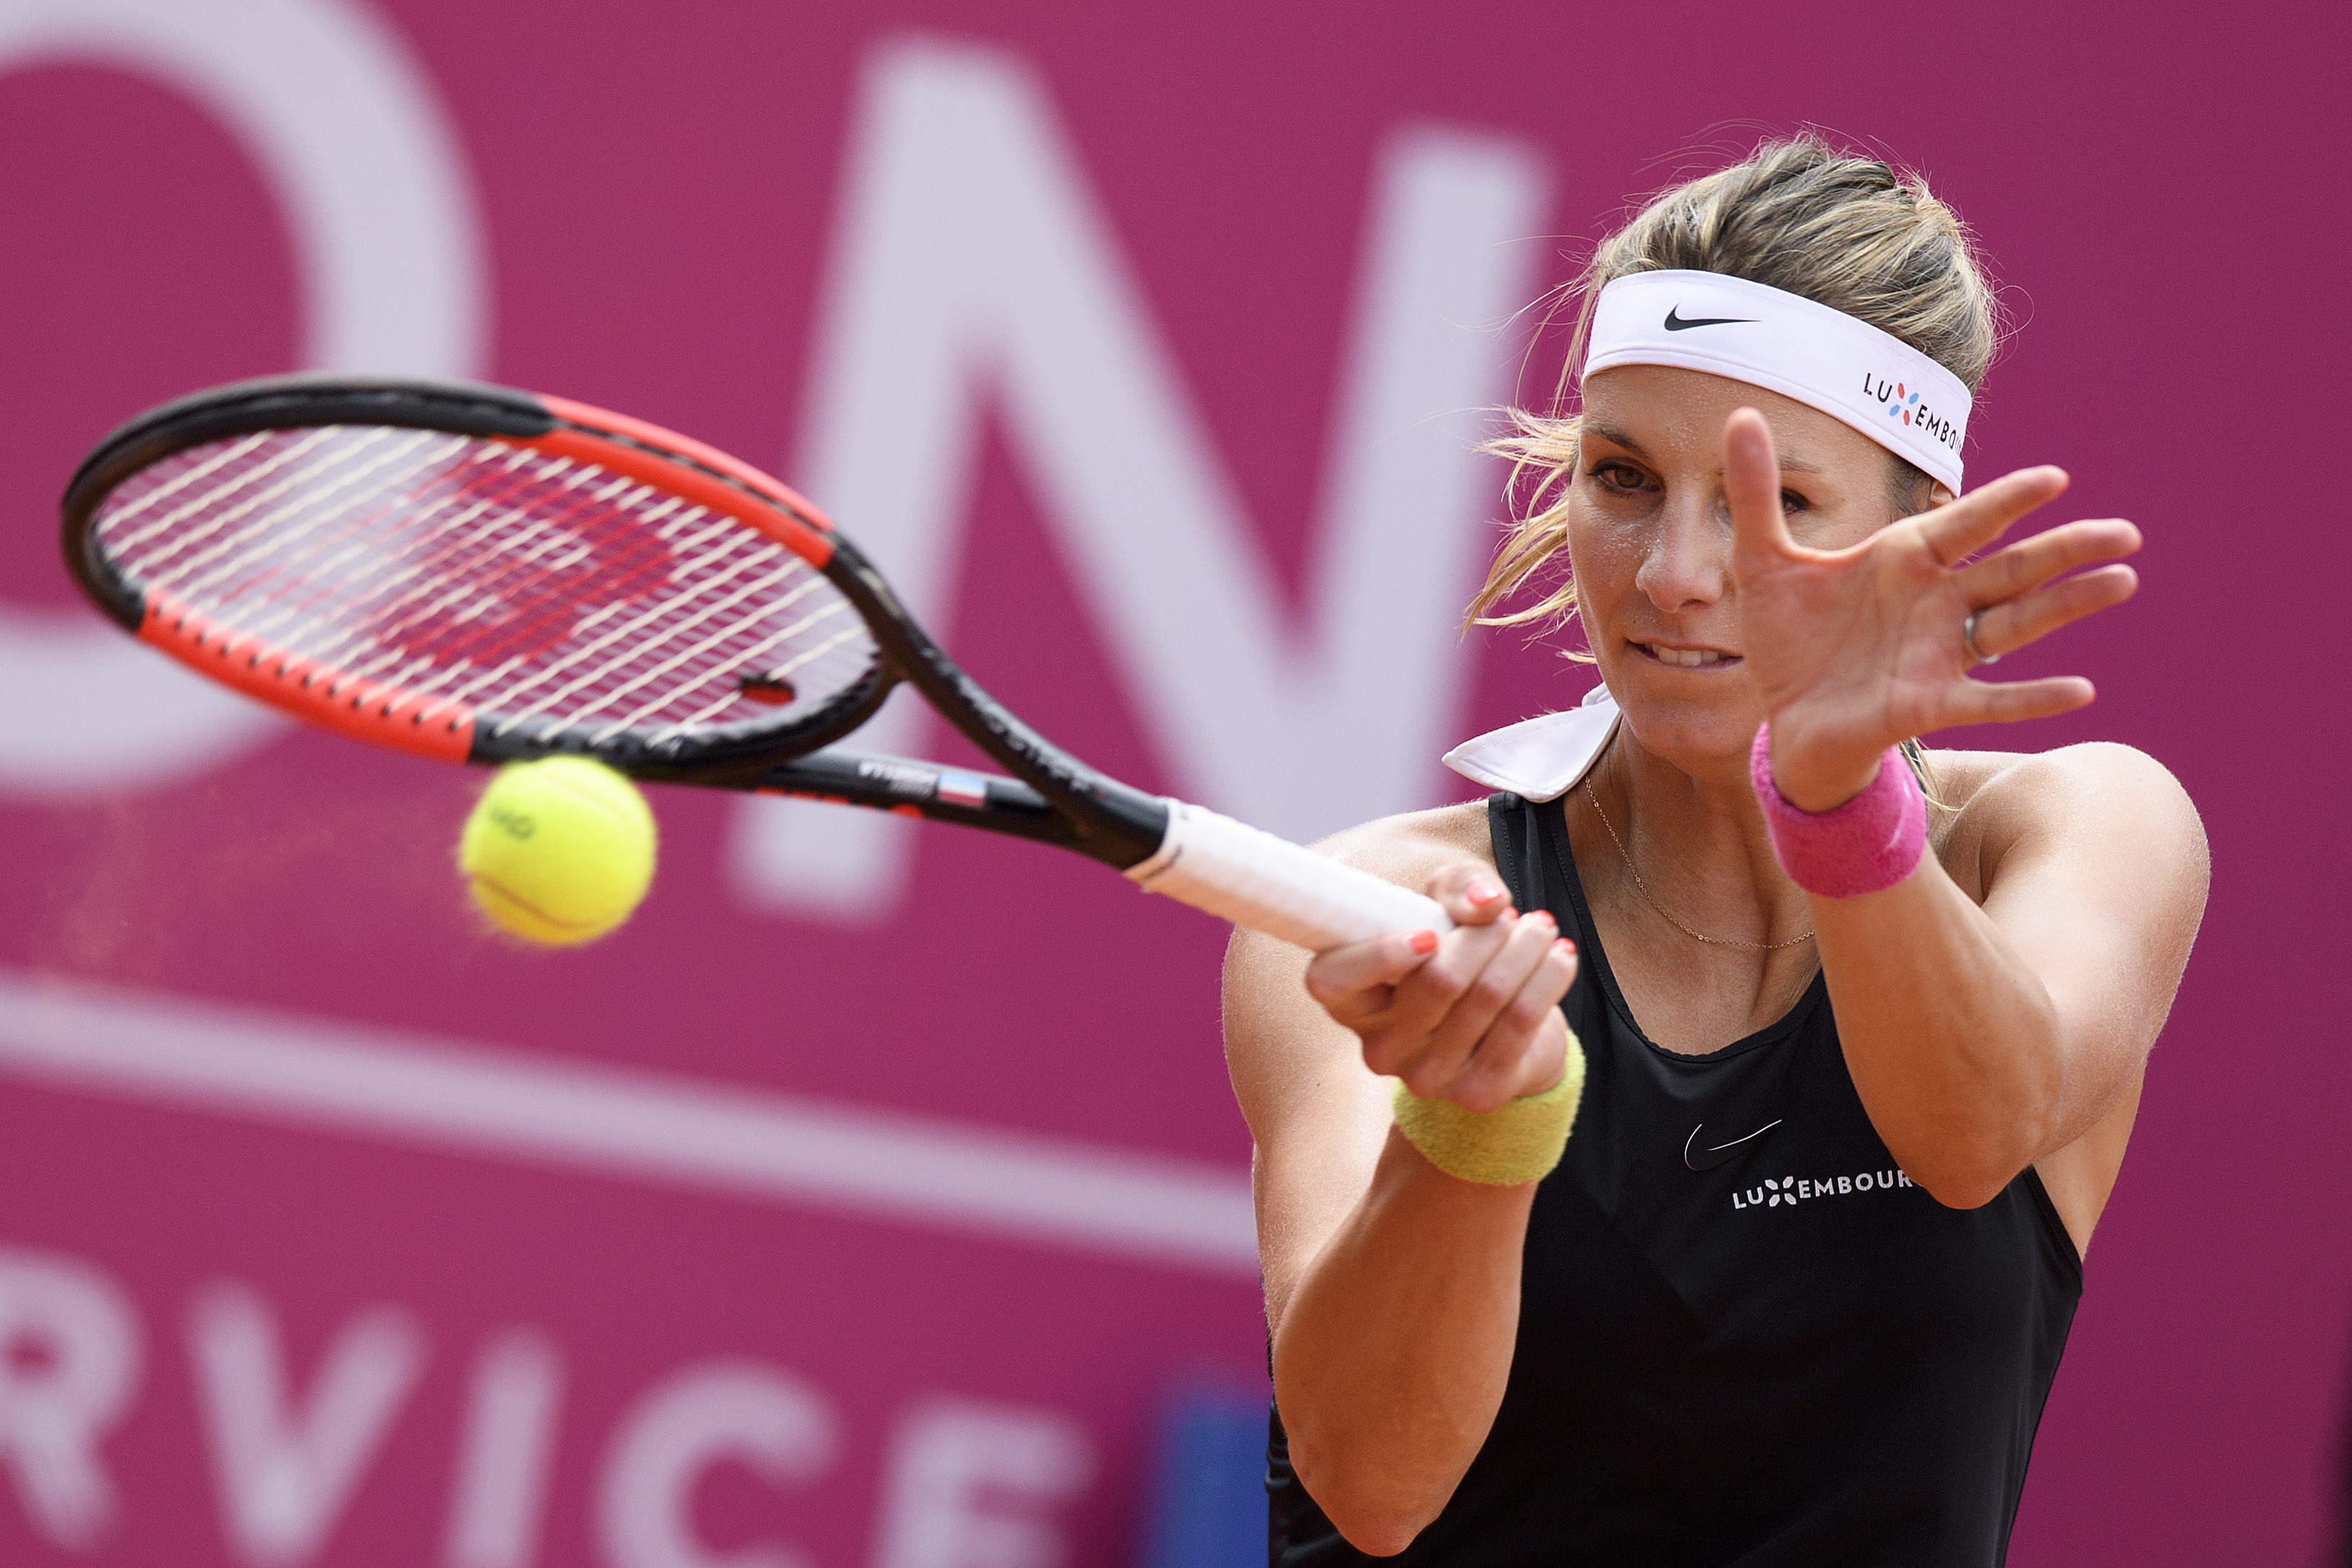 epa06904077 Mandy Minella of Luxembourg in action against Alize Cornet of France during the final game at the WTA Ladies Championship tennis tournament in Gstaad, Switzerland, 22 July 2018.  EPA/ANTHONY ANEX